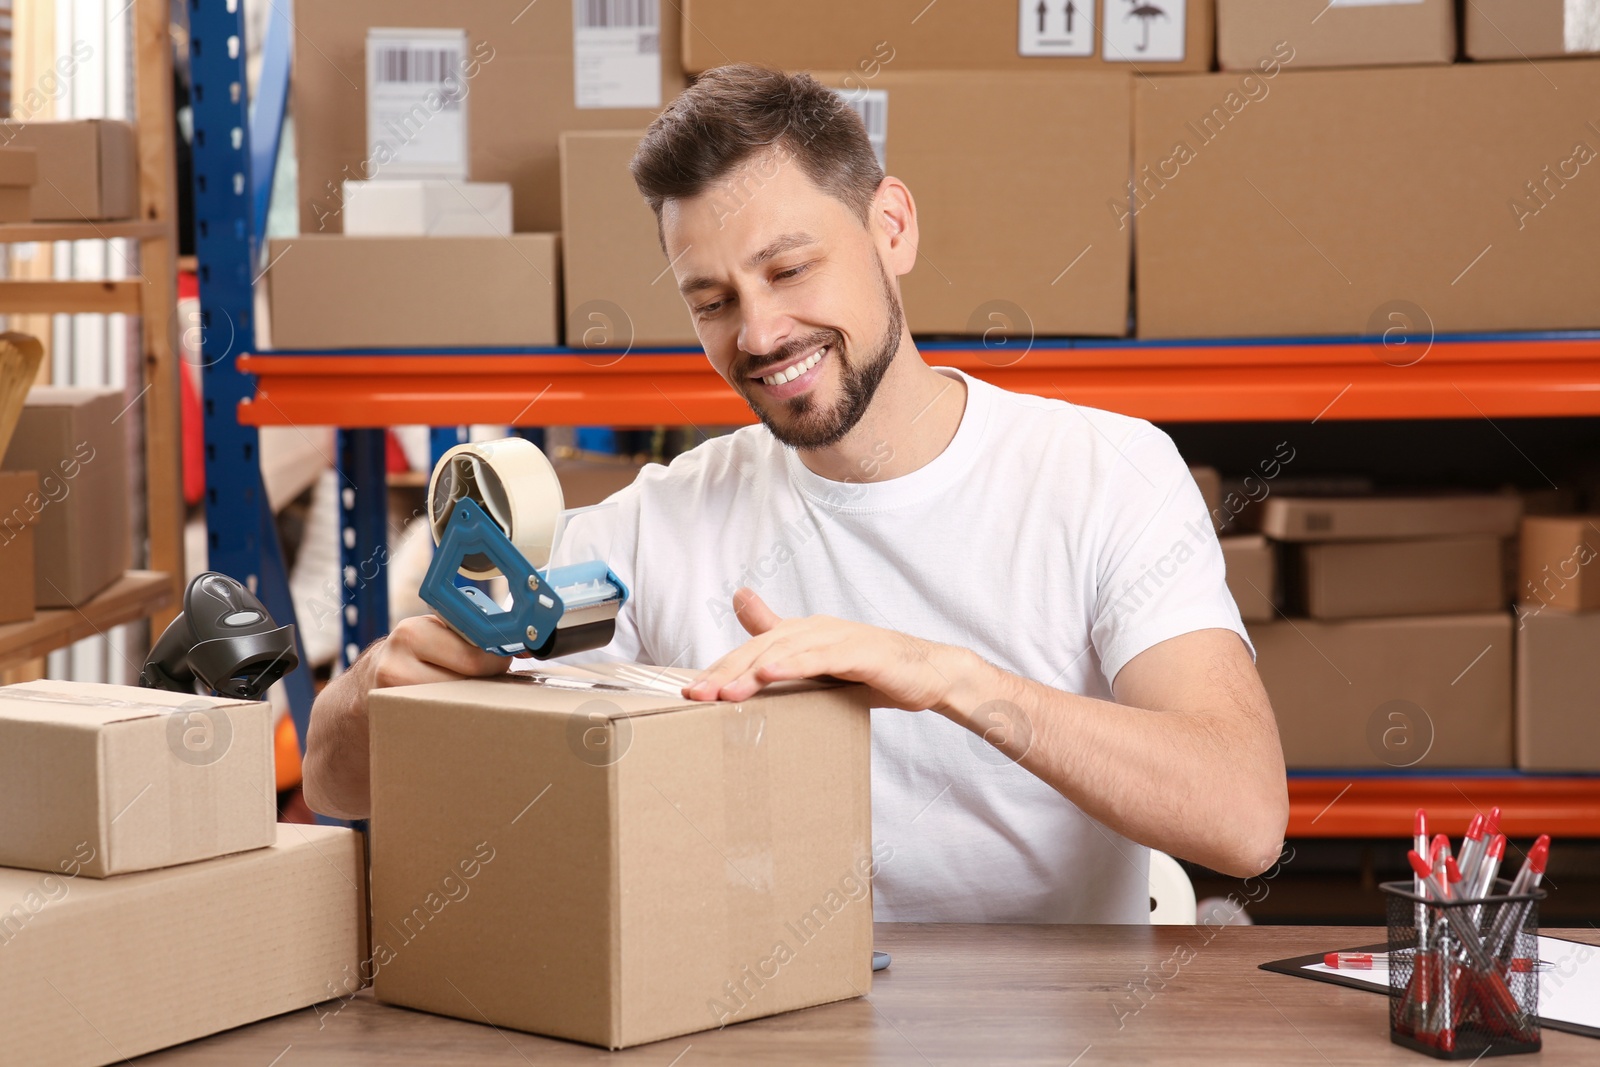 Photo of Post office worker packing parcel at counter indoors